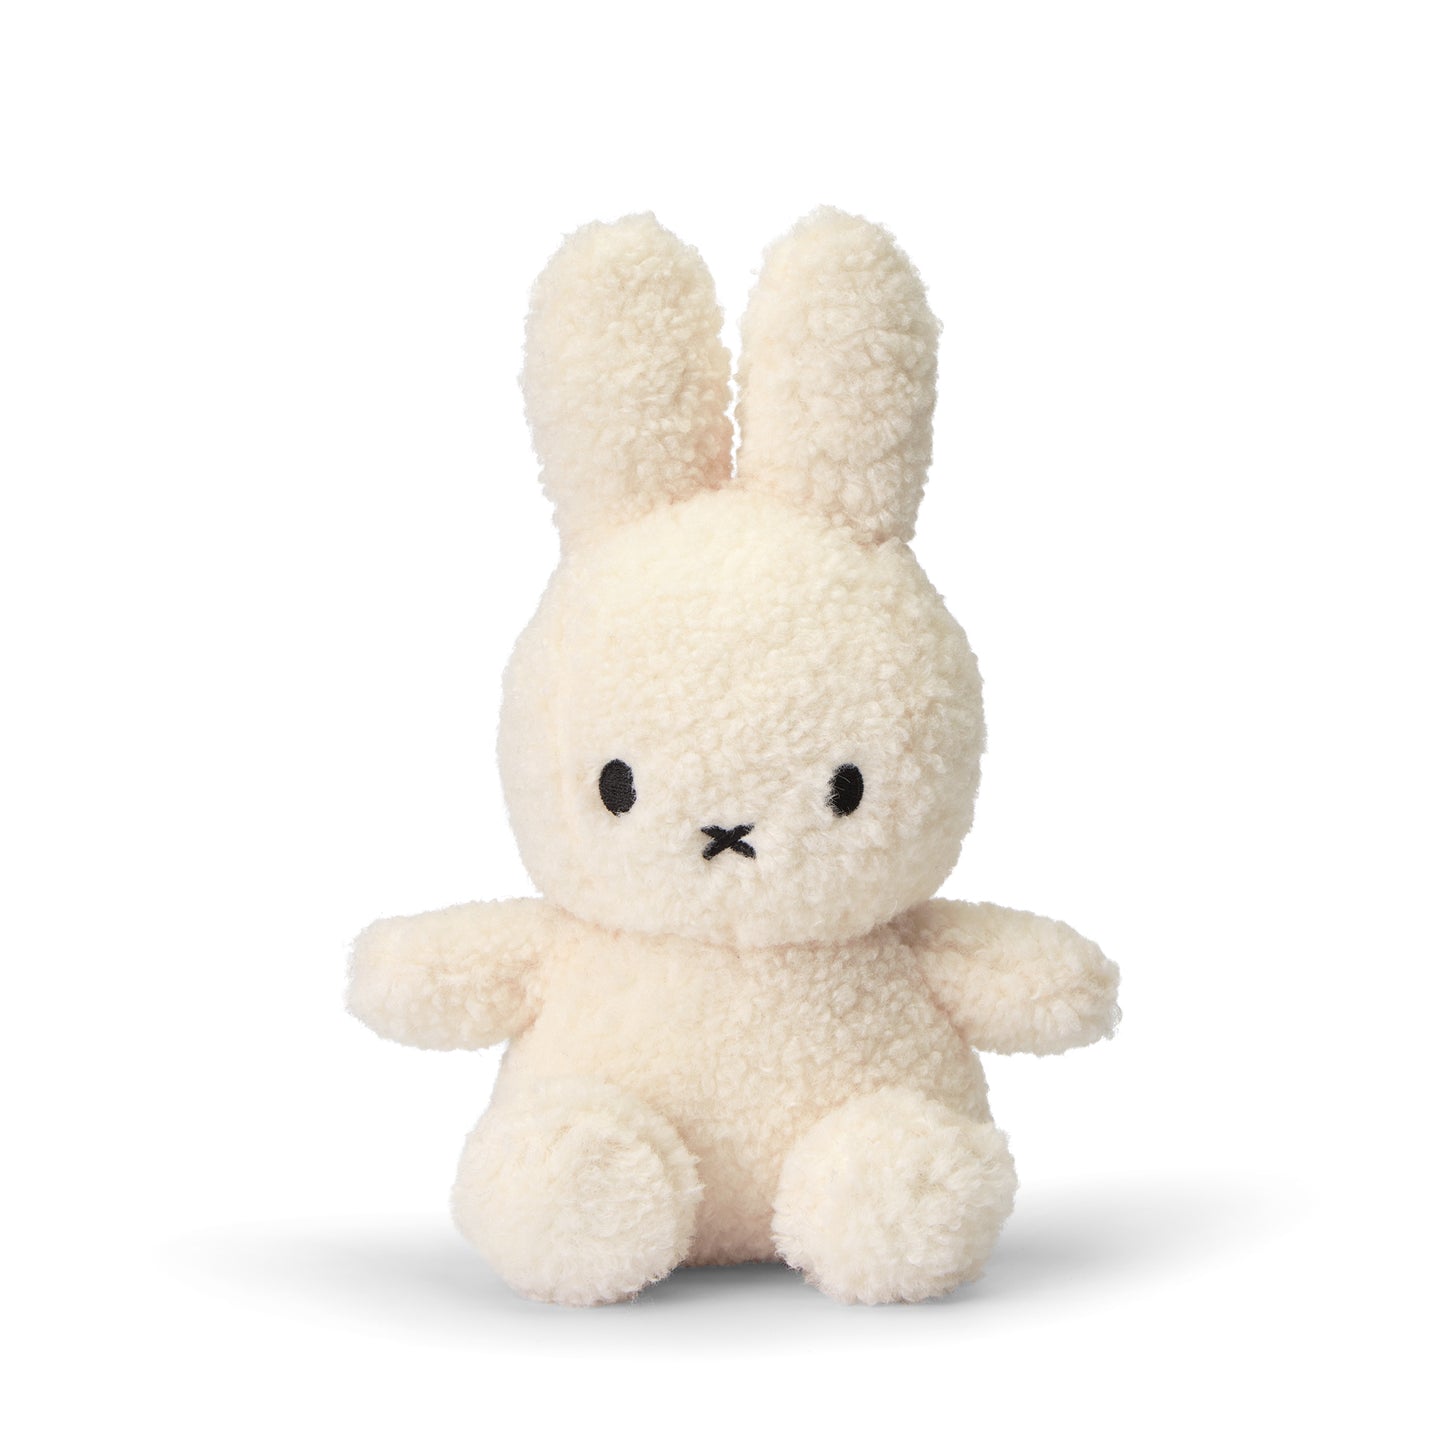 Recycled cream Miffy soft toy